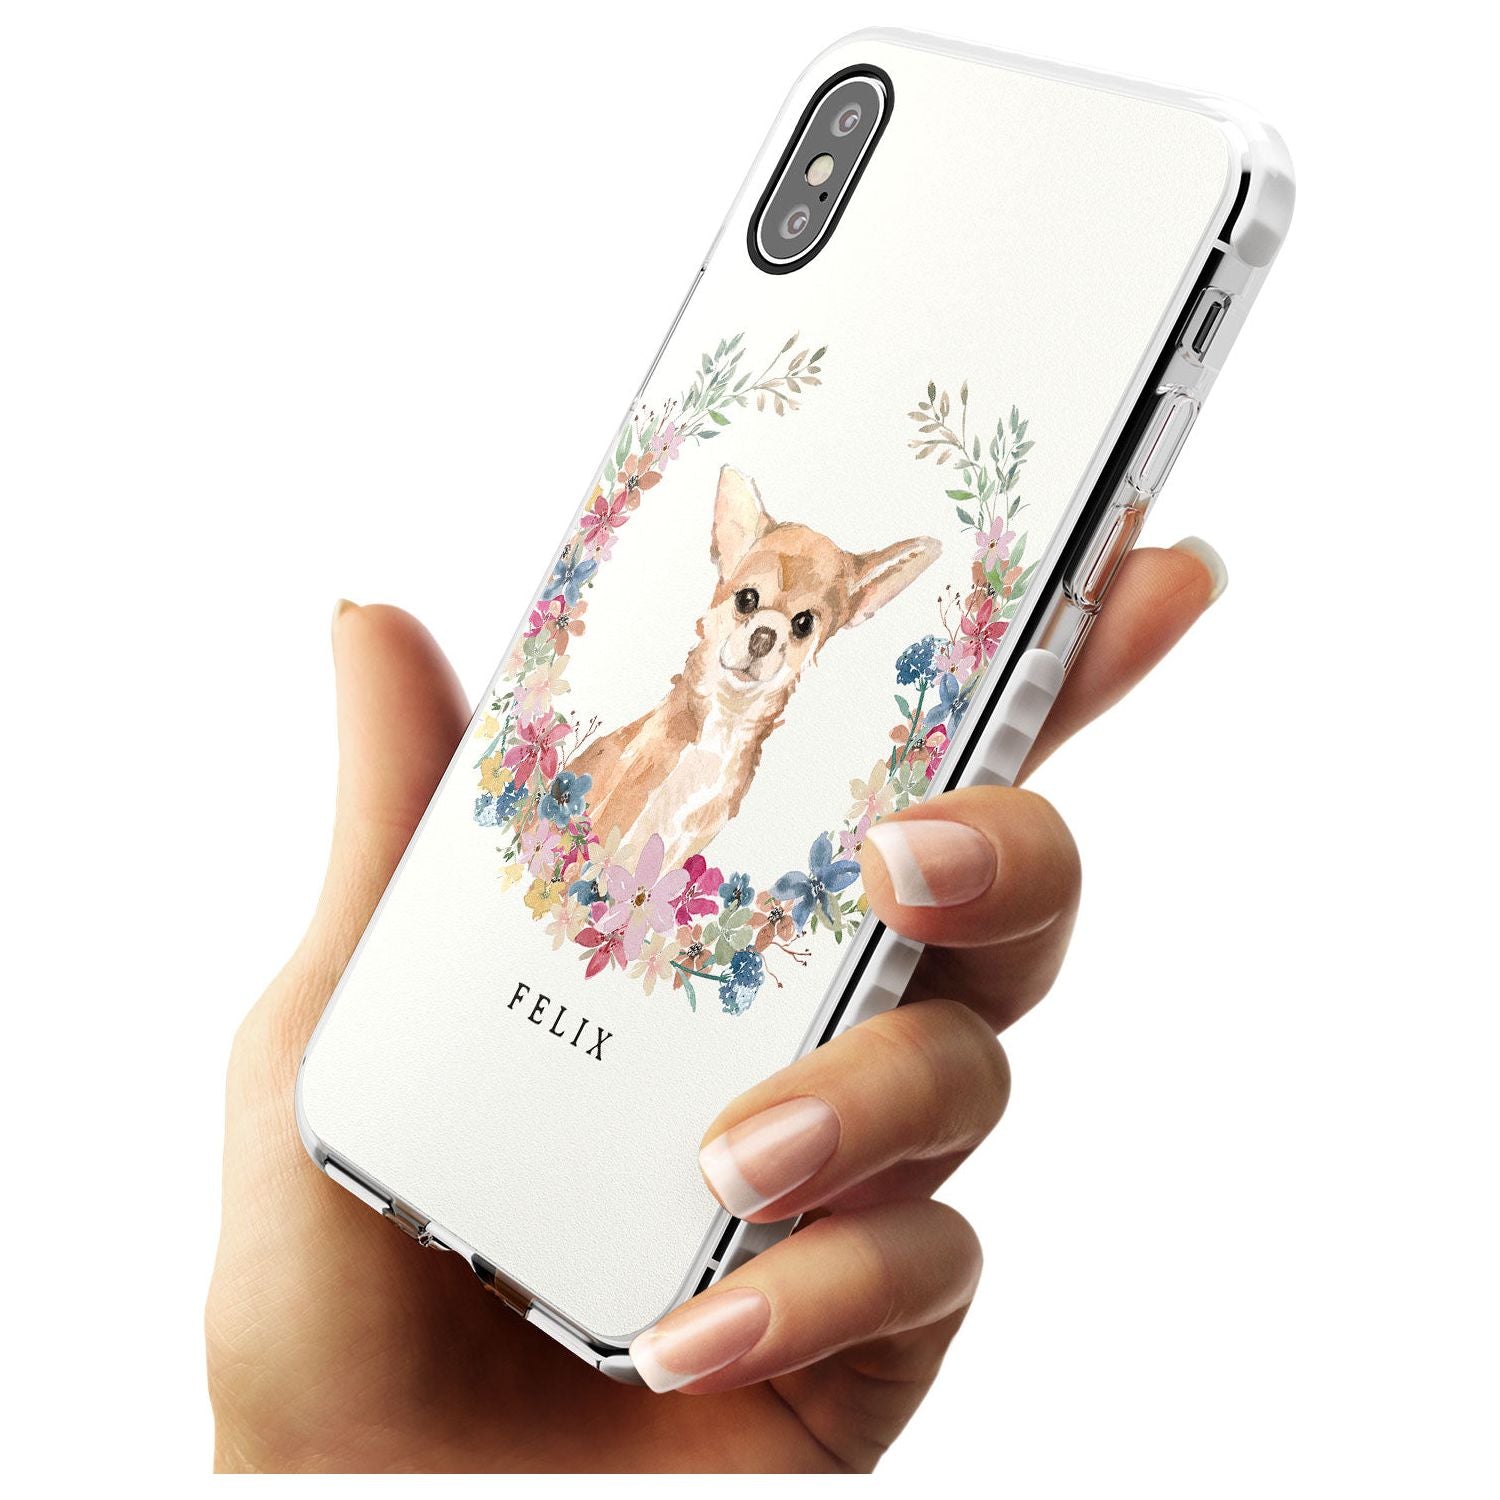 Chihuahua - Watercolour Dog Portrait Impact Phone Case for iPhone X XS Max XR